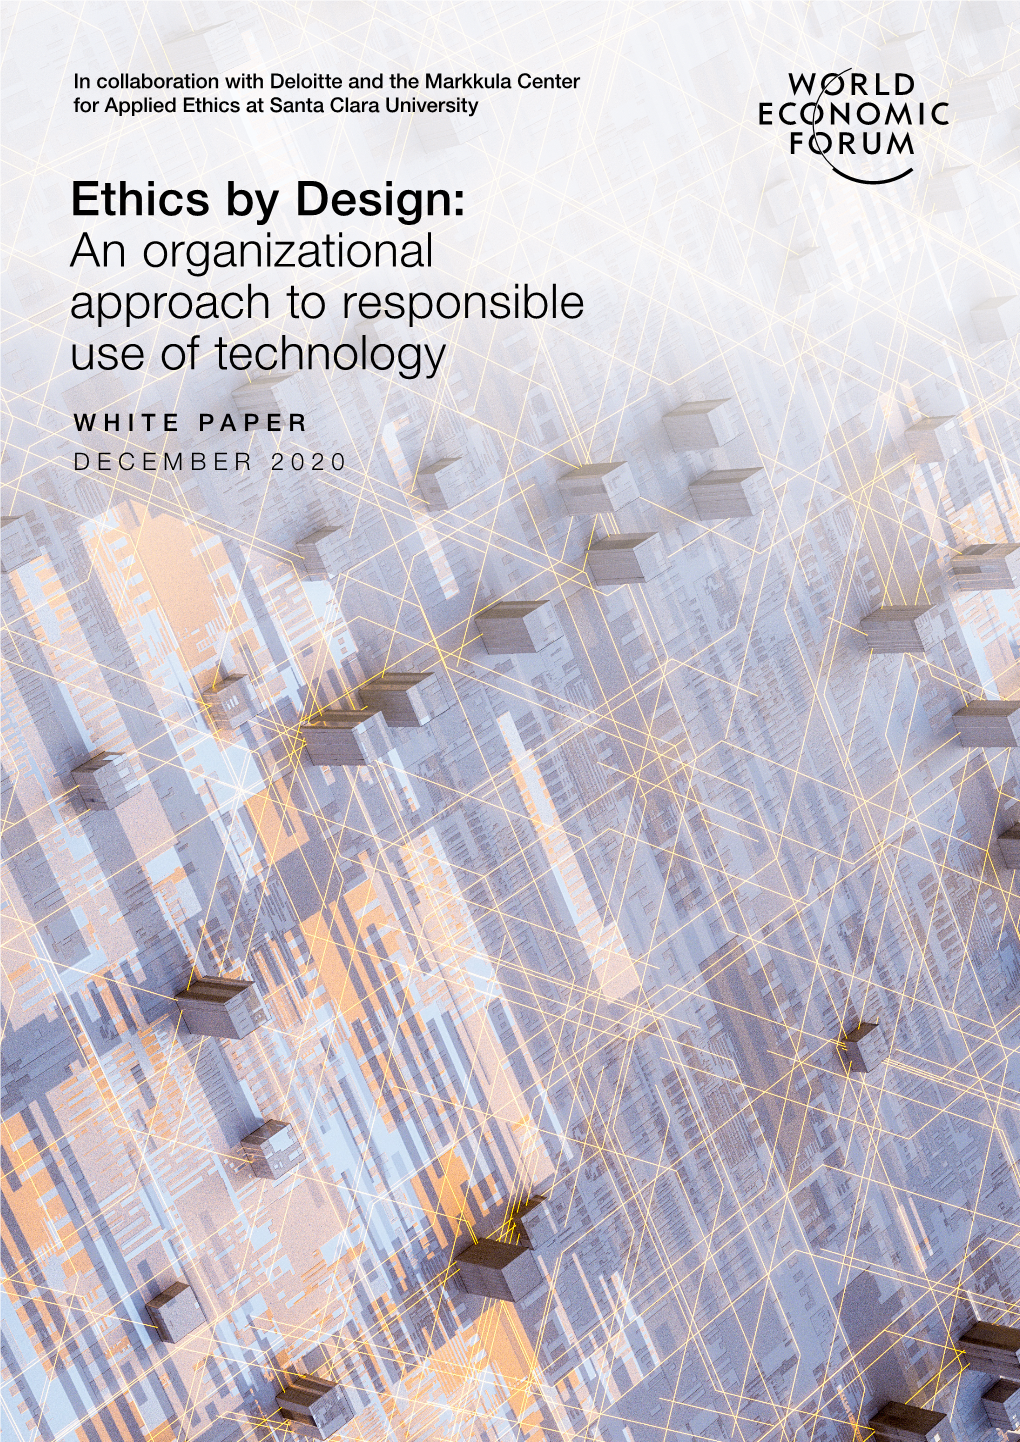 Ethics by Design: an Organizational Approach to Responsible Use of Technology